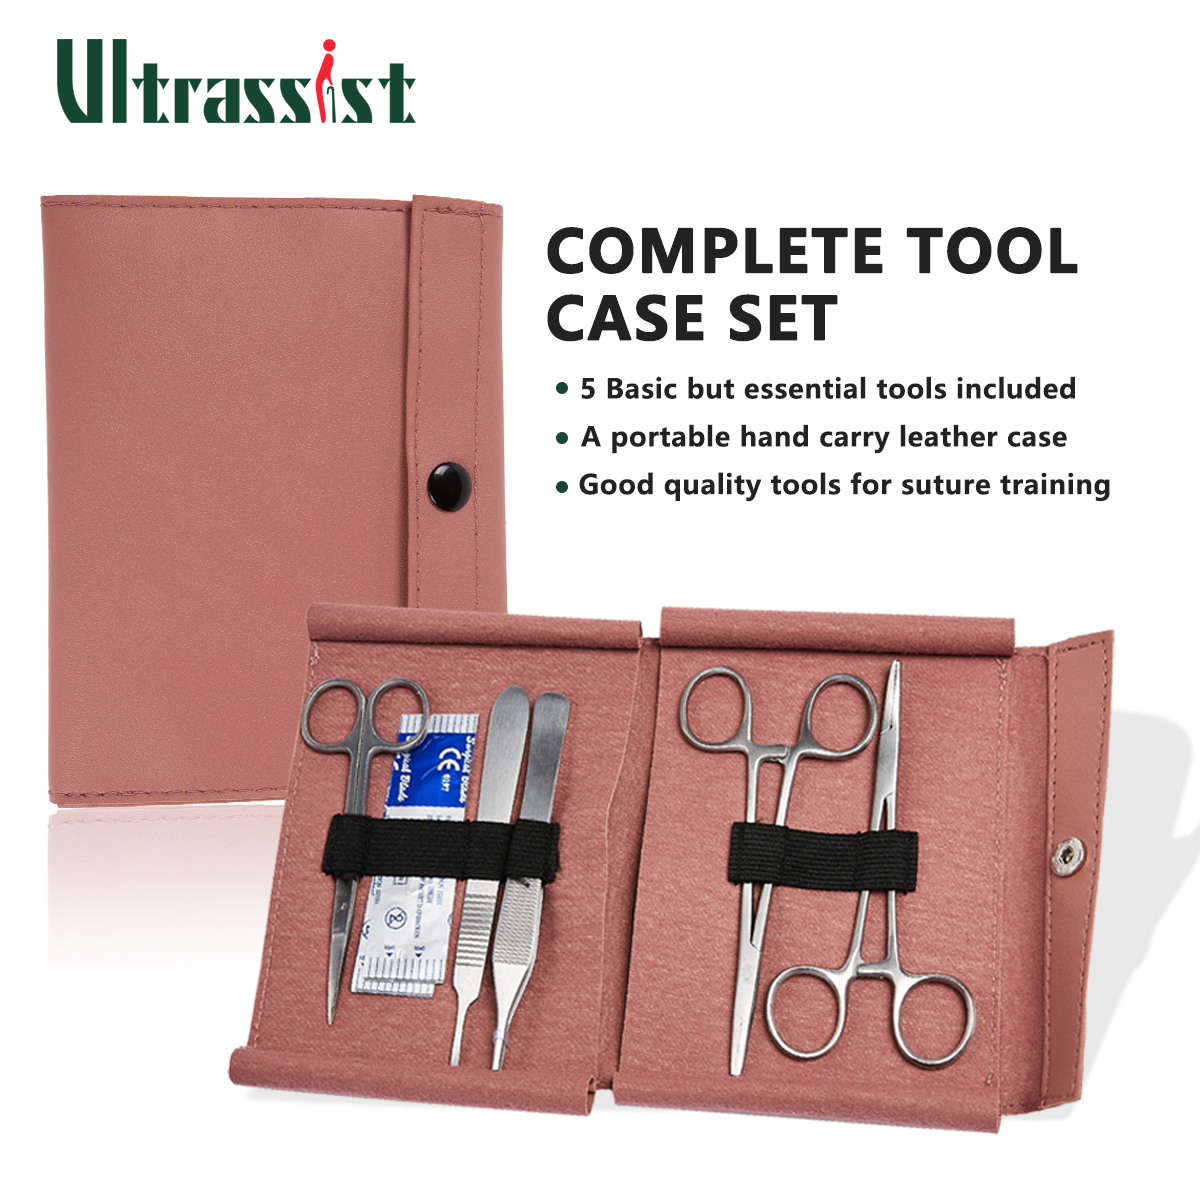 Ultrassist Suture Kit for Suture Training, Silicone Stitching Pad with Durable Embedded Mesh, Includes Suture Tools Kit & Various Suture Threads and